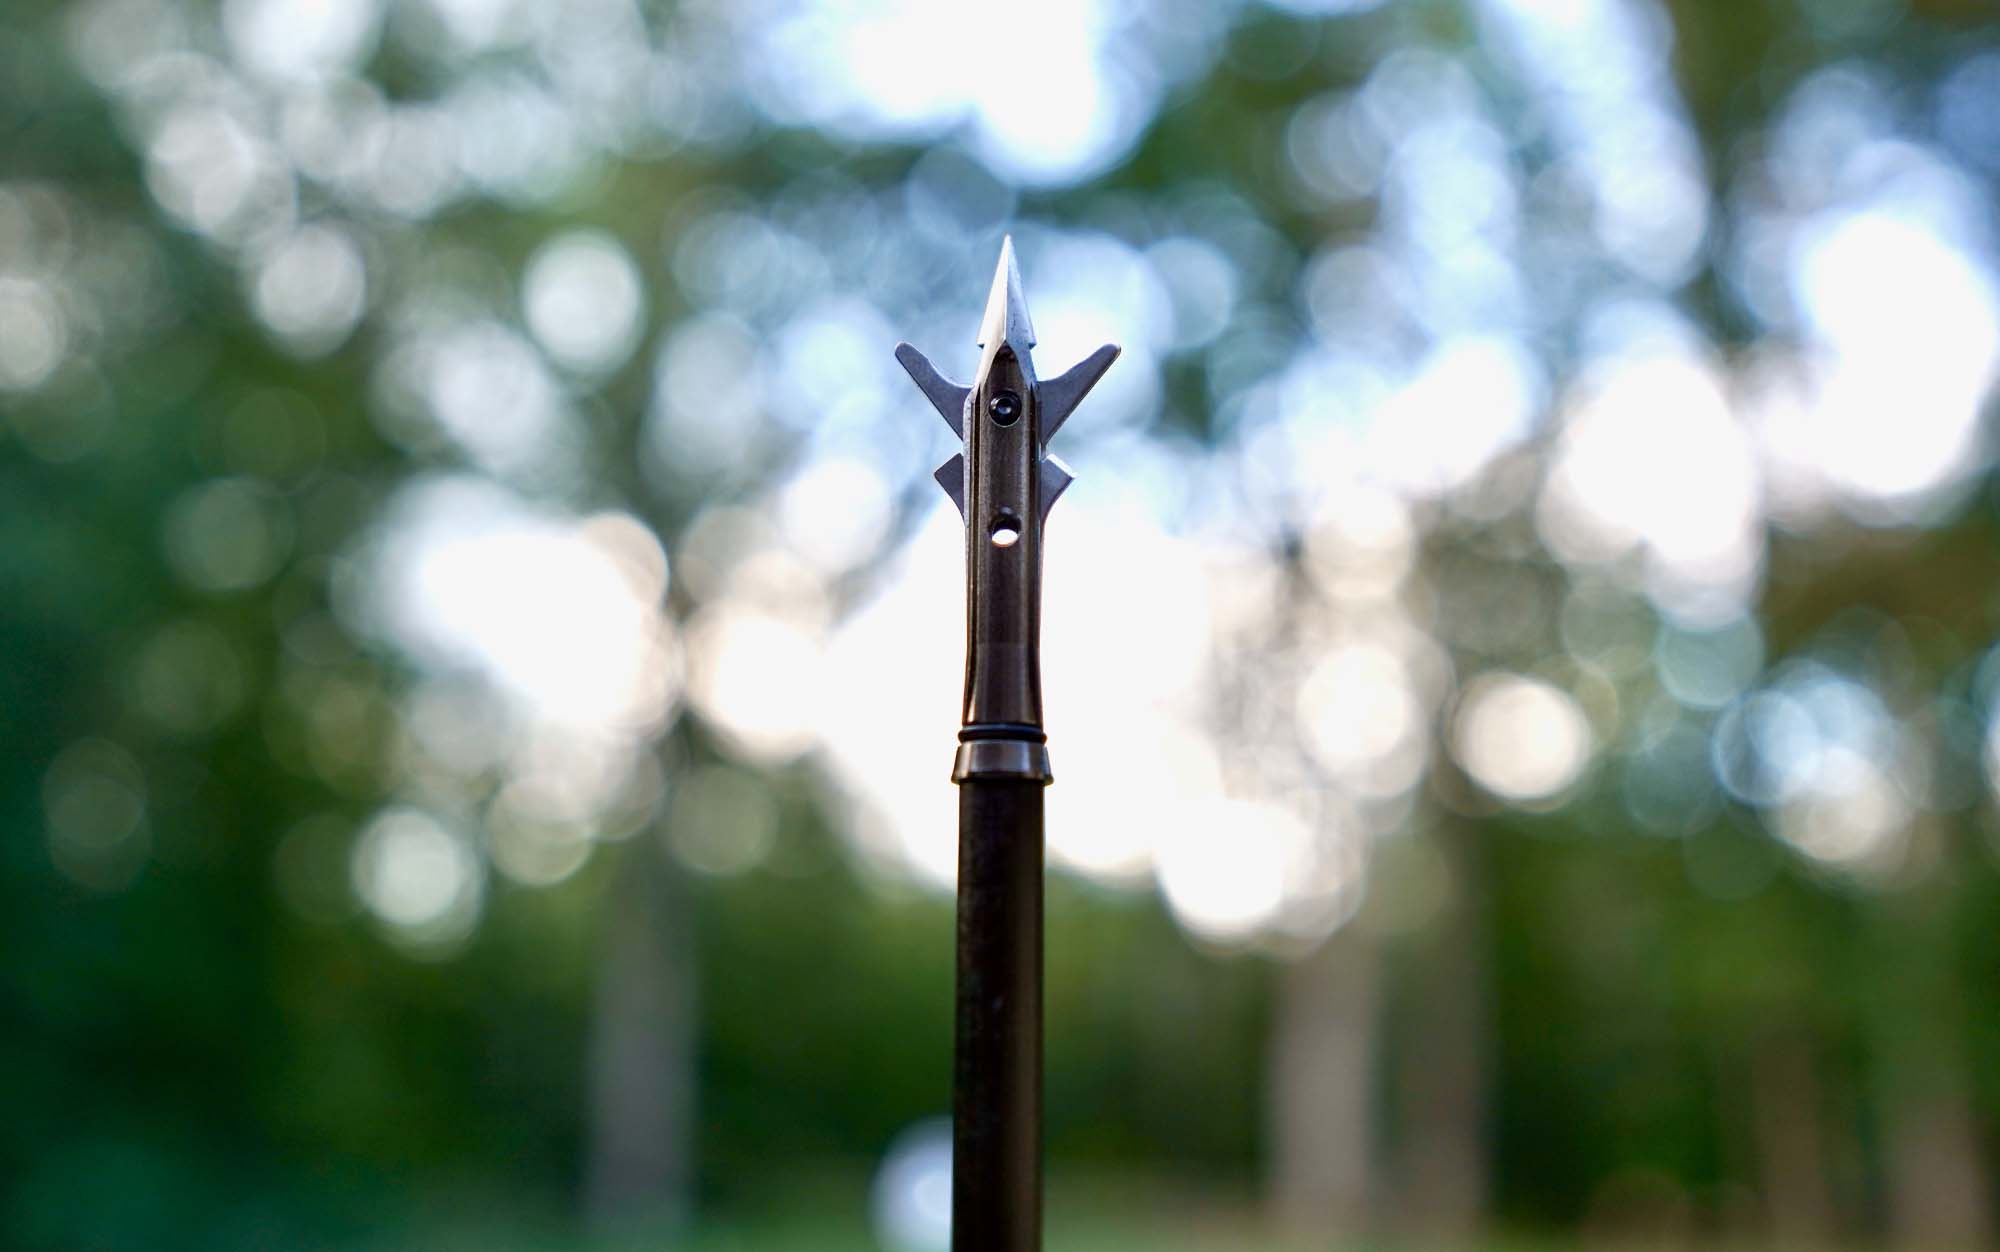 The SEVR Titanium 1.5 and 2.0 is the best mechanical broadhead.